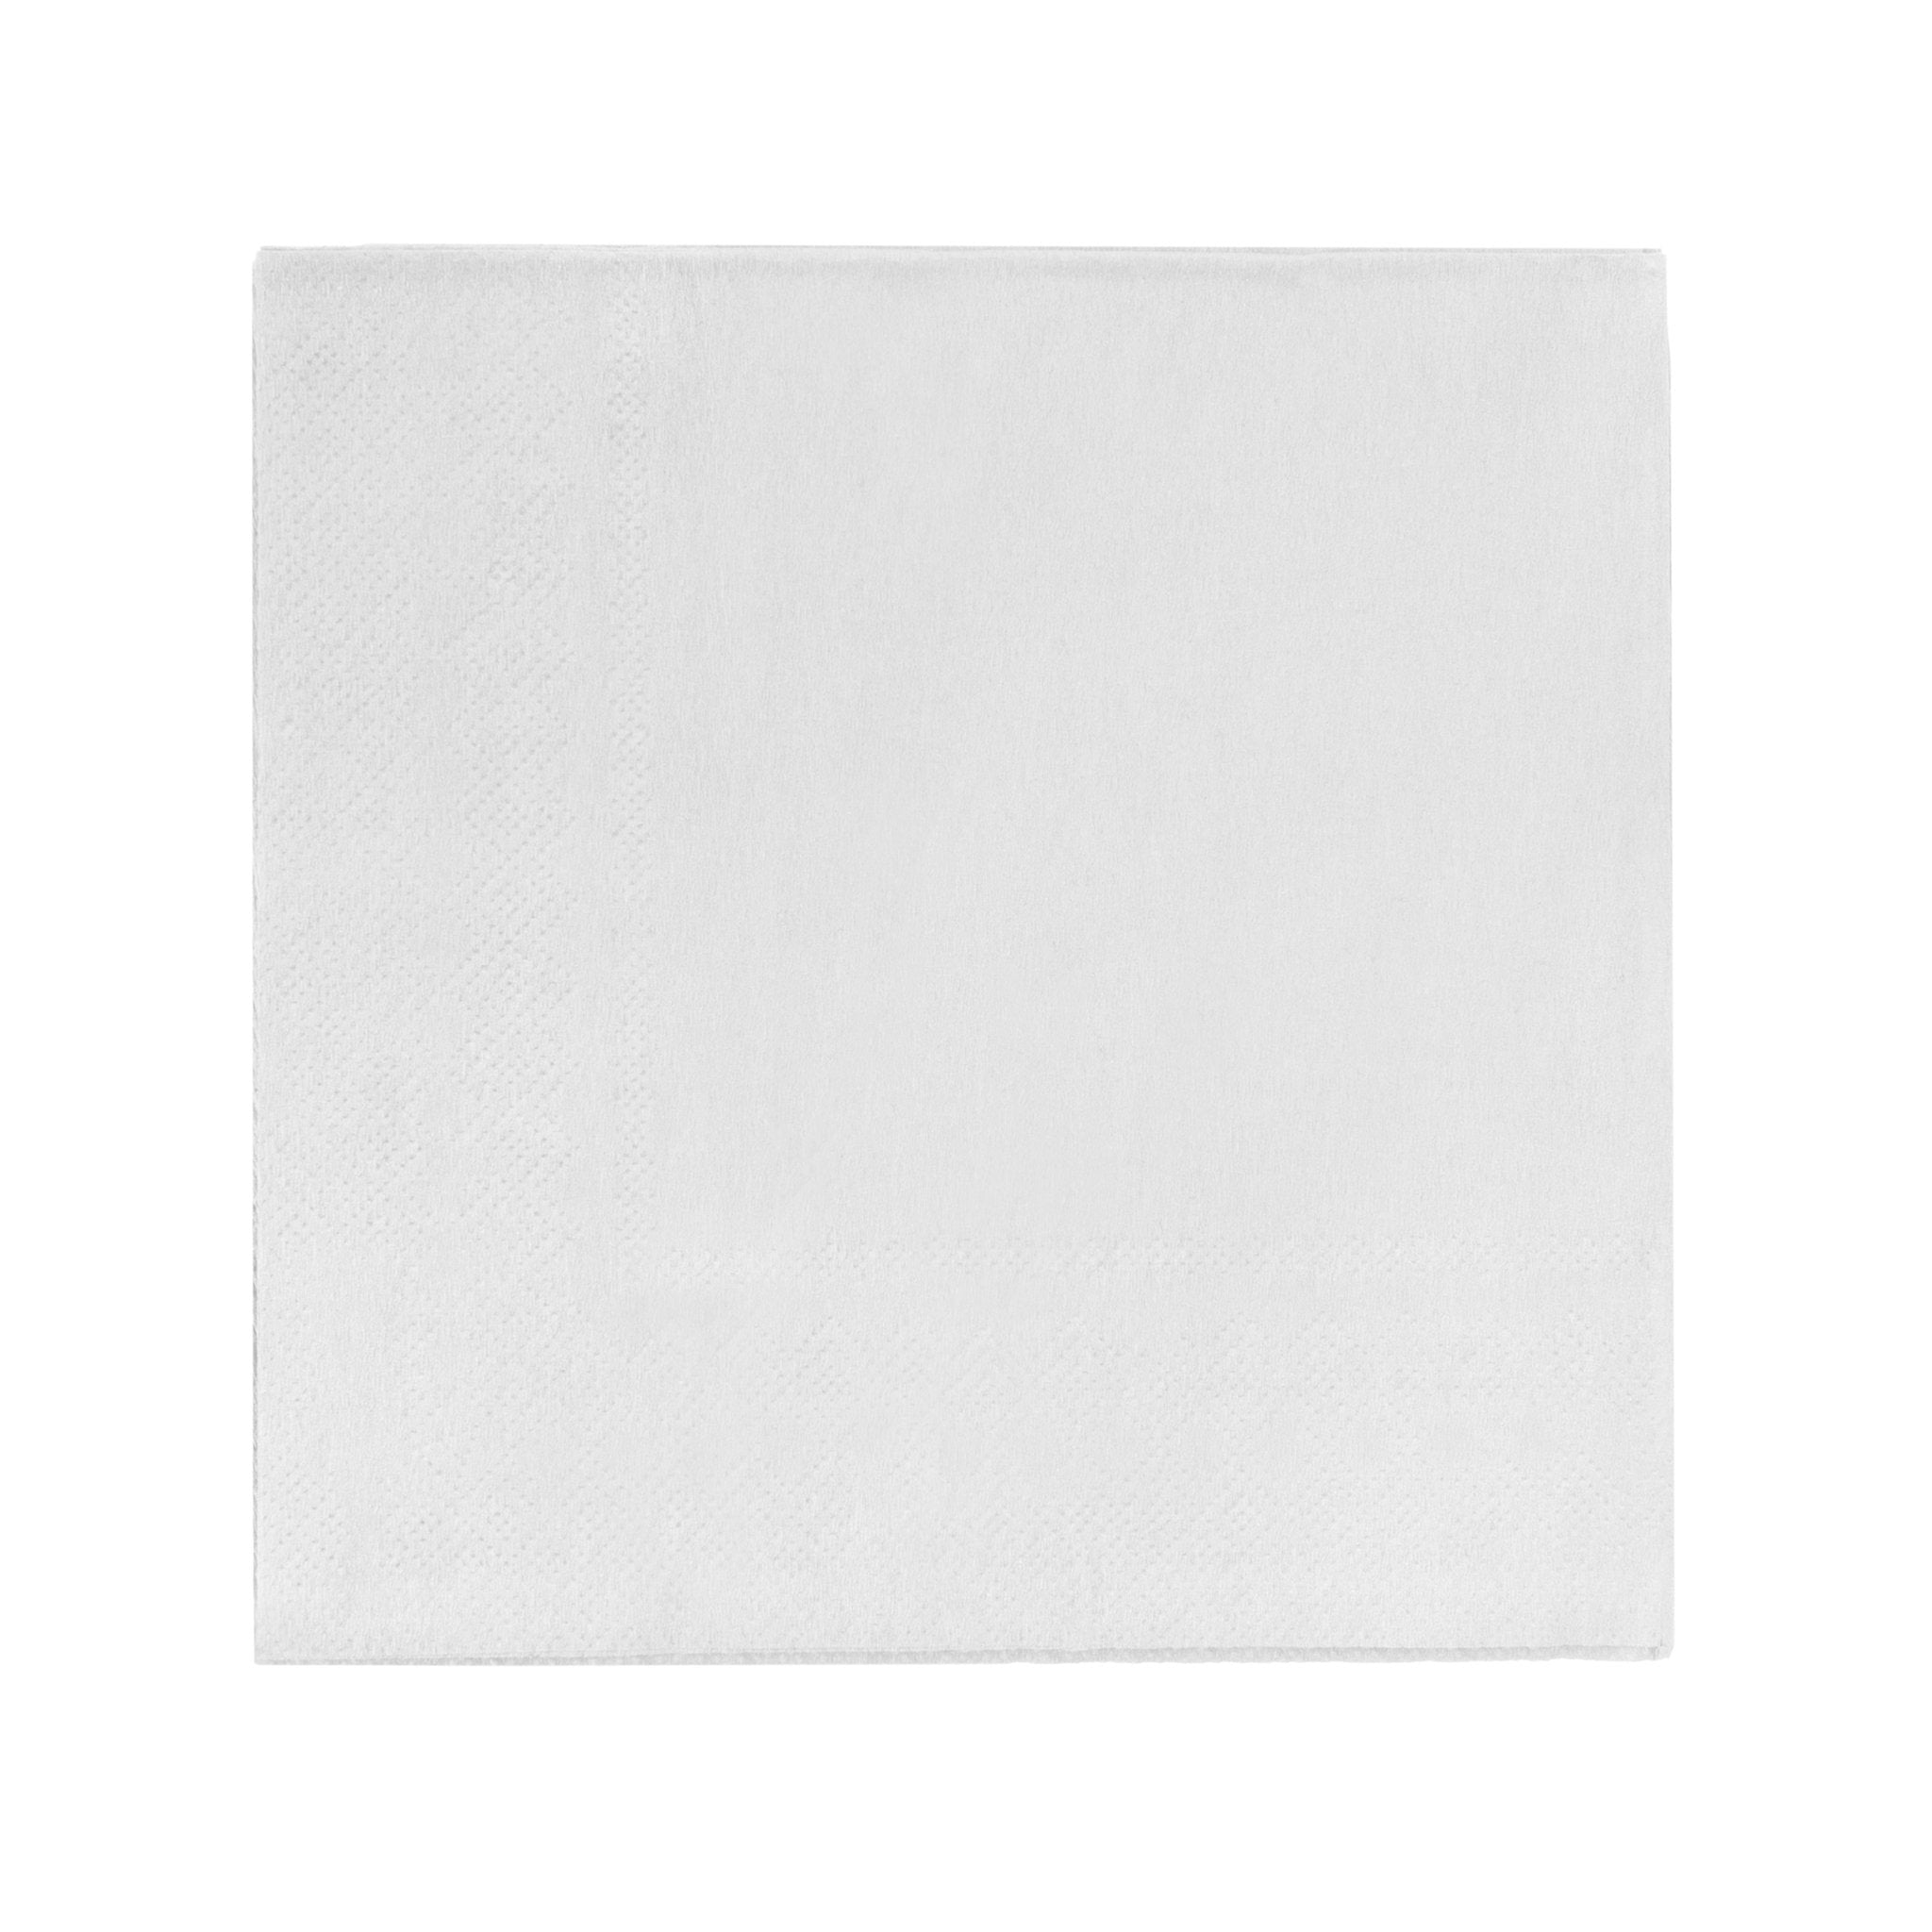 White Luncheon Napkins | 3600 Pack